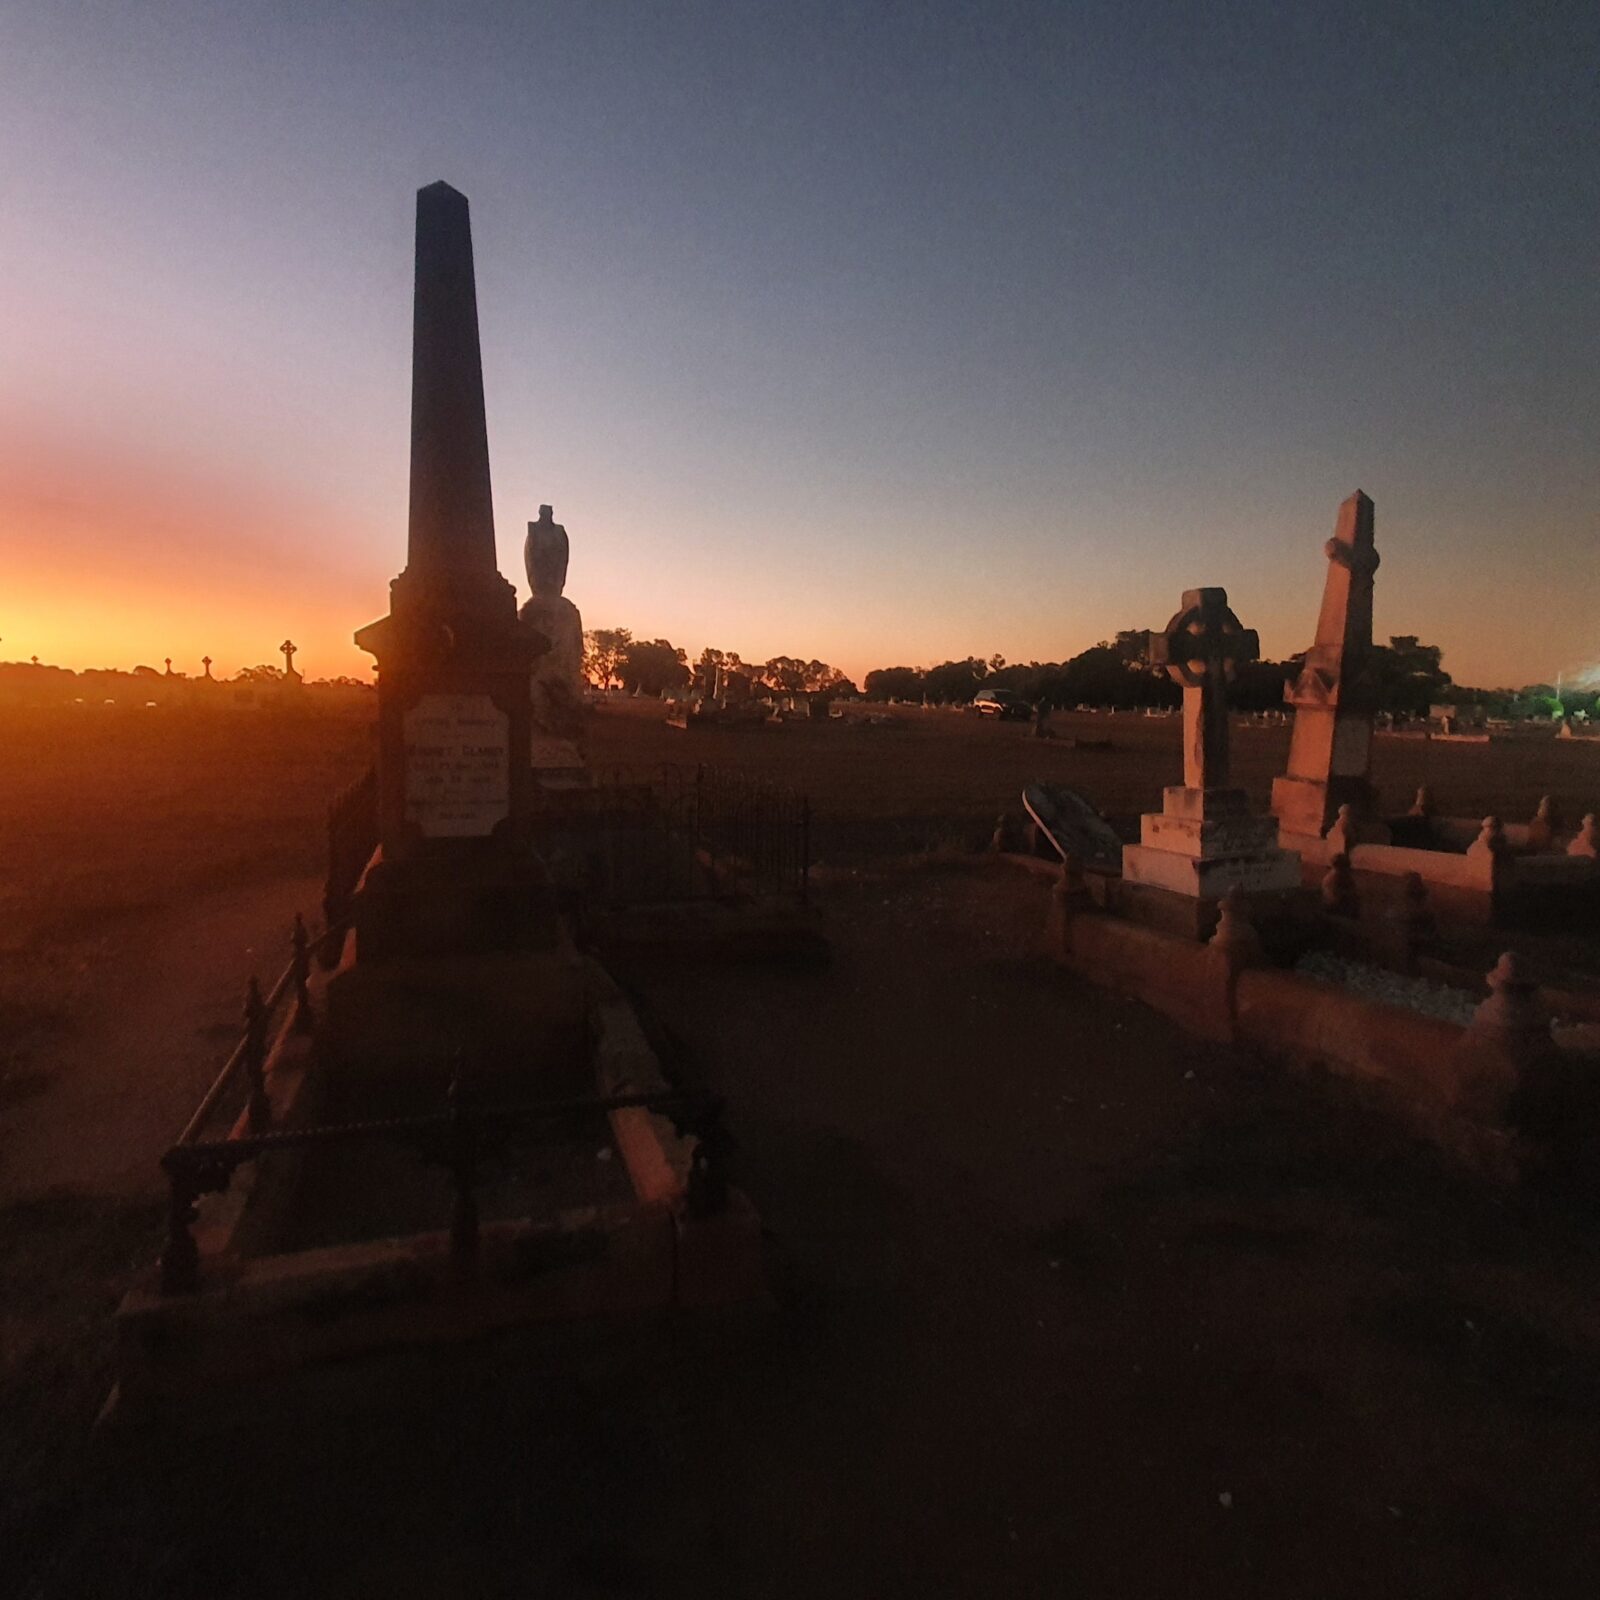 Charters Towers Cemetery with a few grave statues and thesun setting in distance